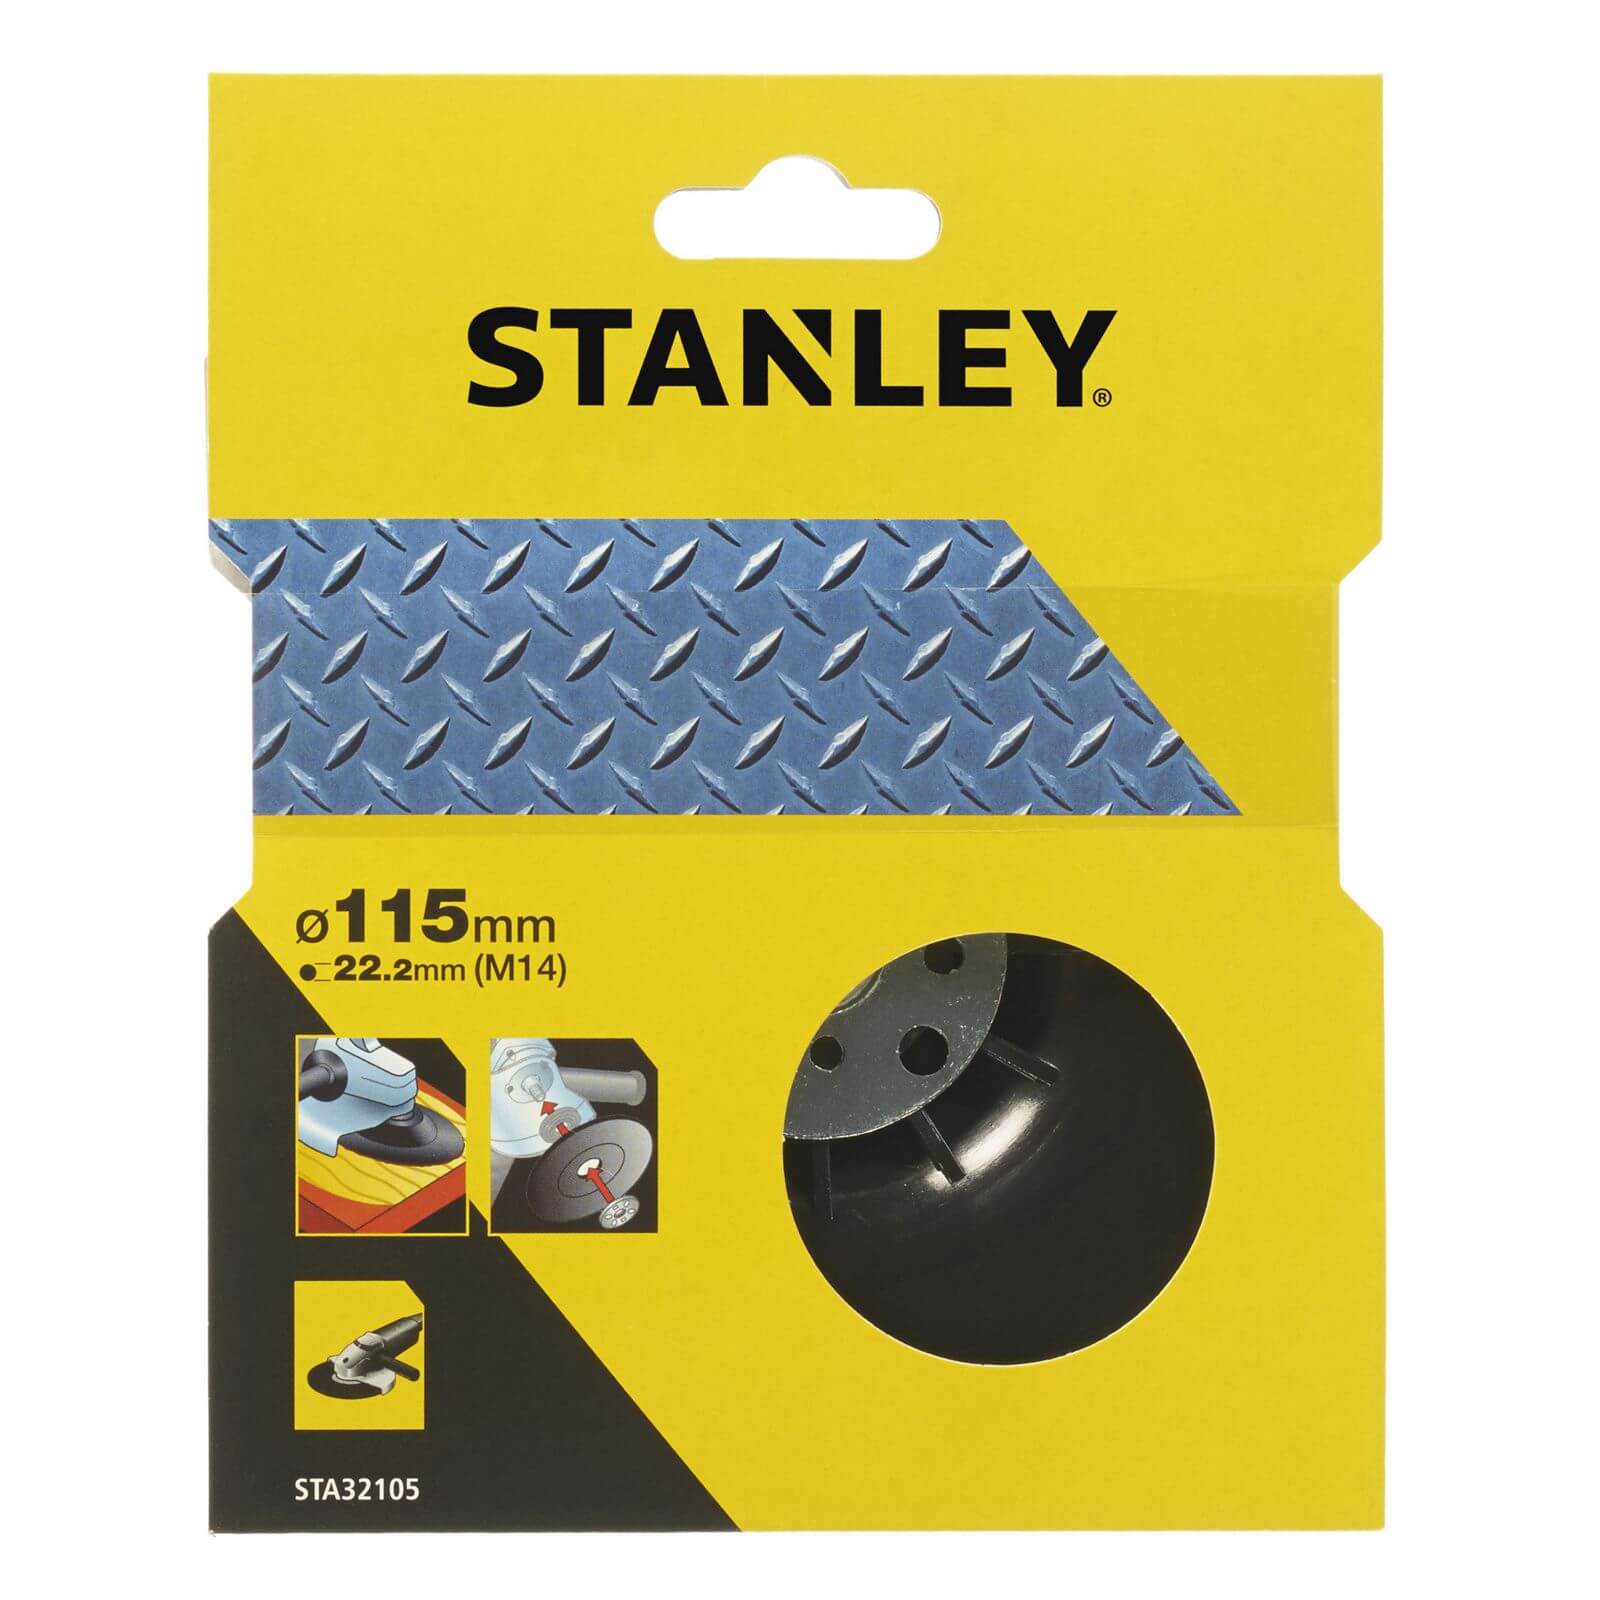 Photo of Stanley 115mm Angle Grinder Backing Pad - Sta32105-xj